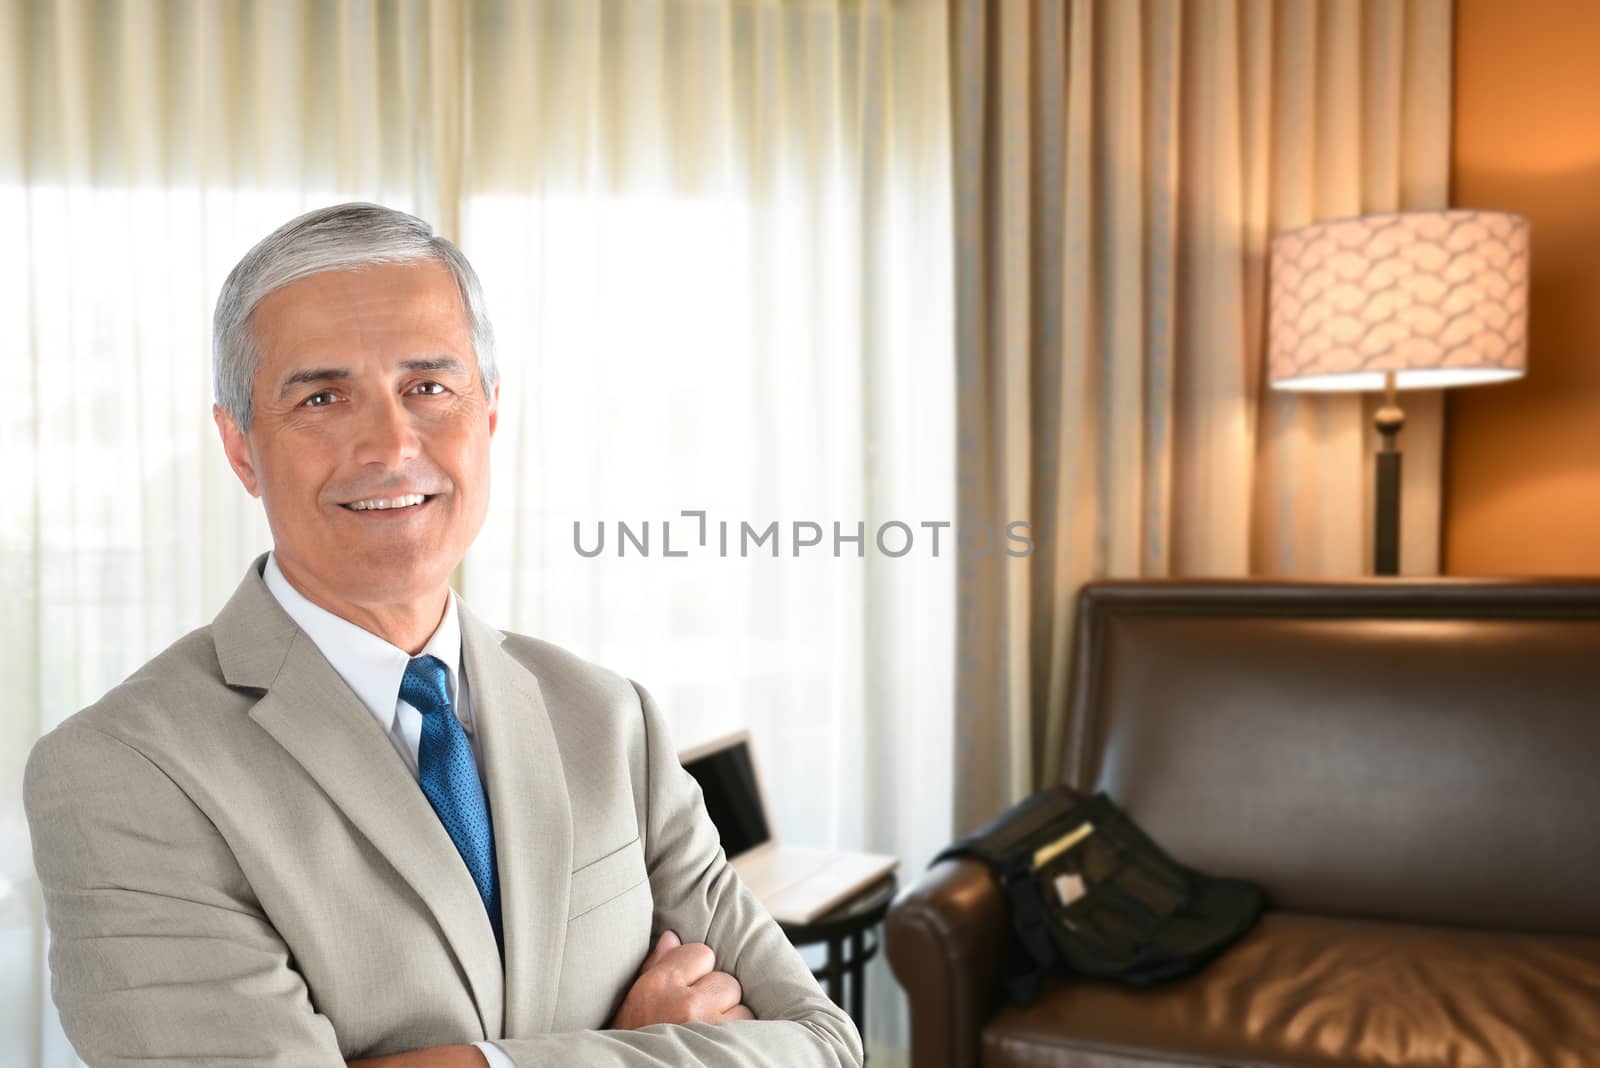 Businessman in hotel room with arms folded and looking at camera.